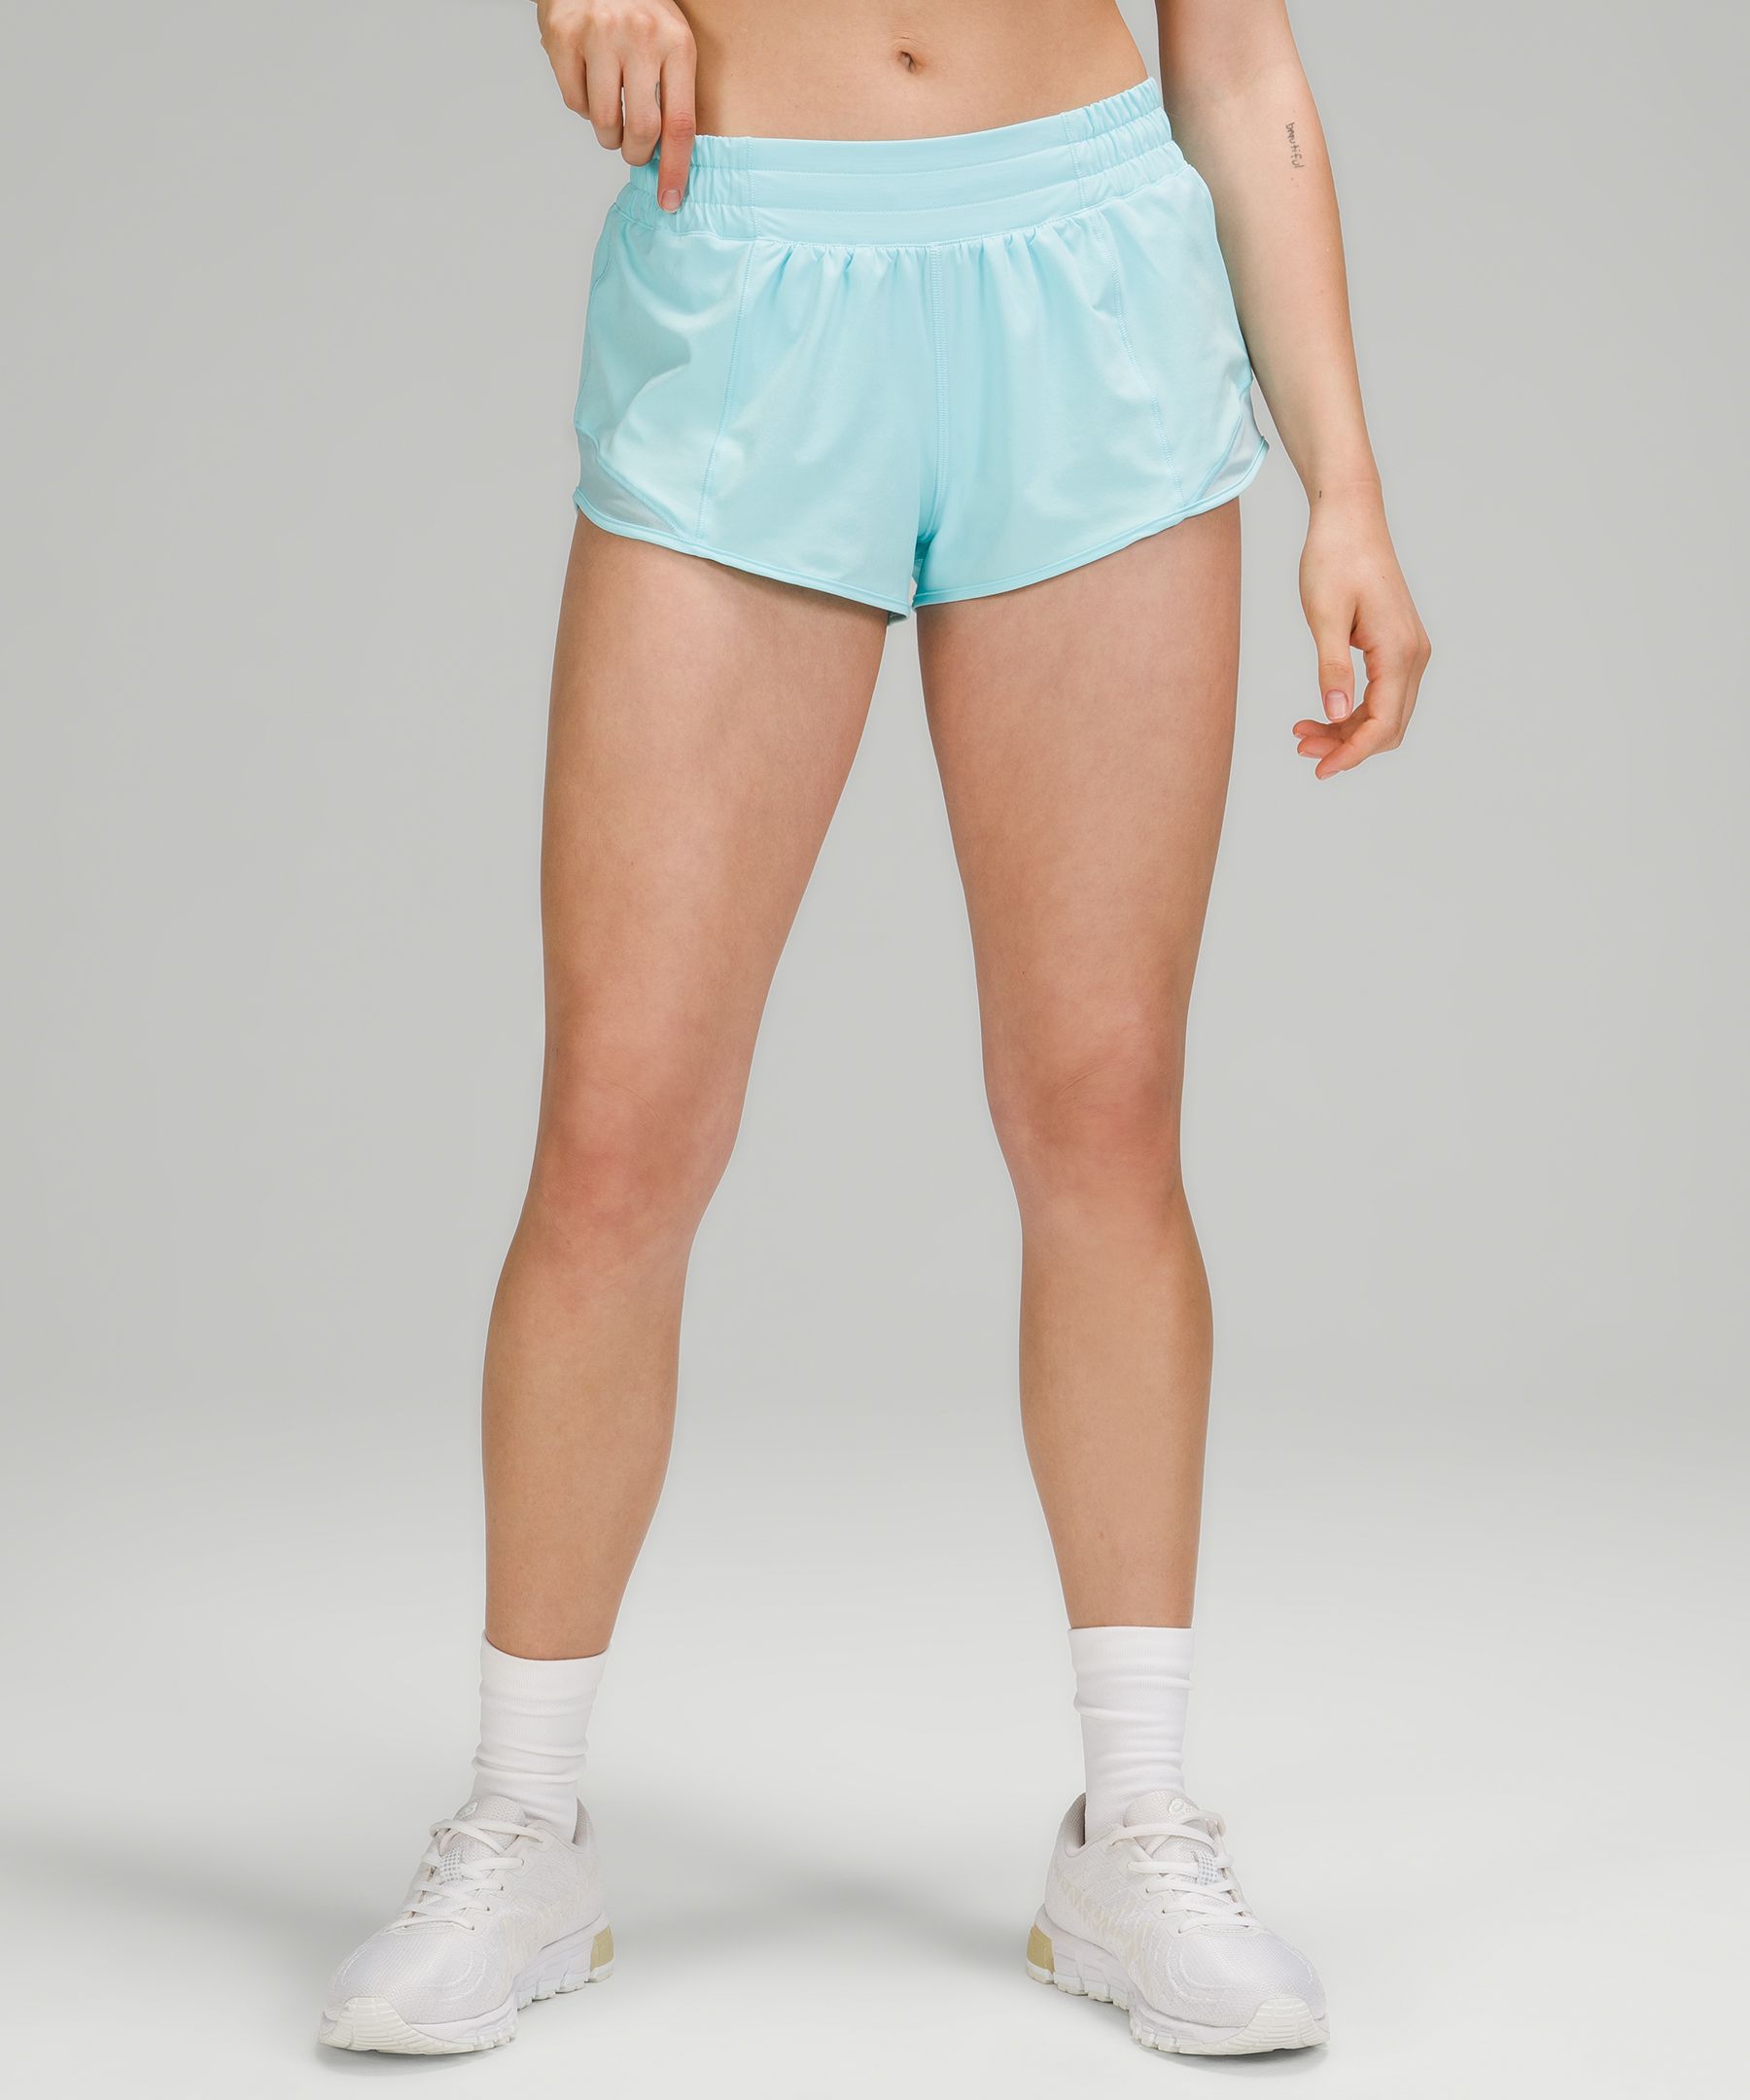 Lululemon Hotty Hot Low-rise Lined Shorts 2.5" In Icing Blue